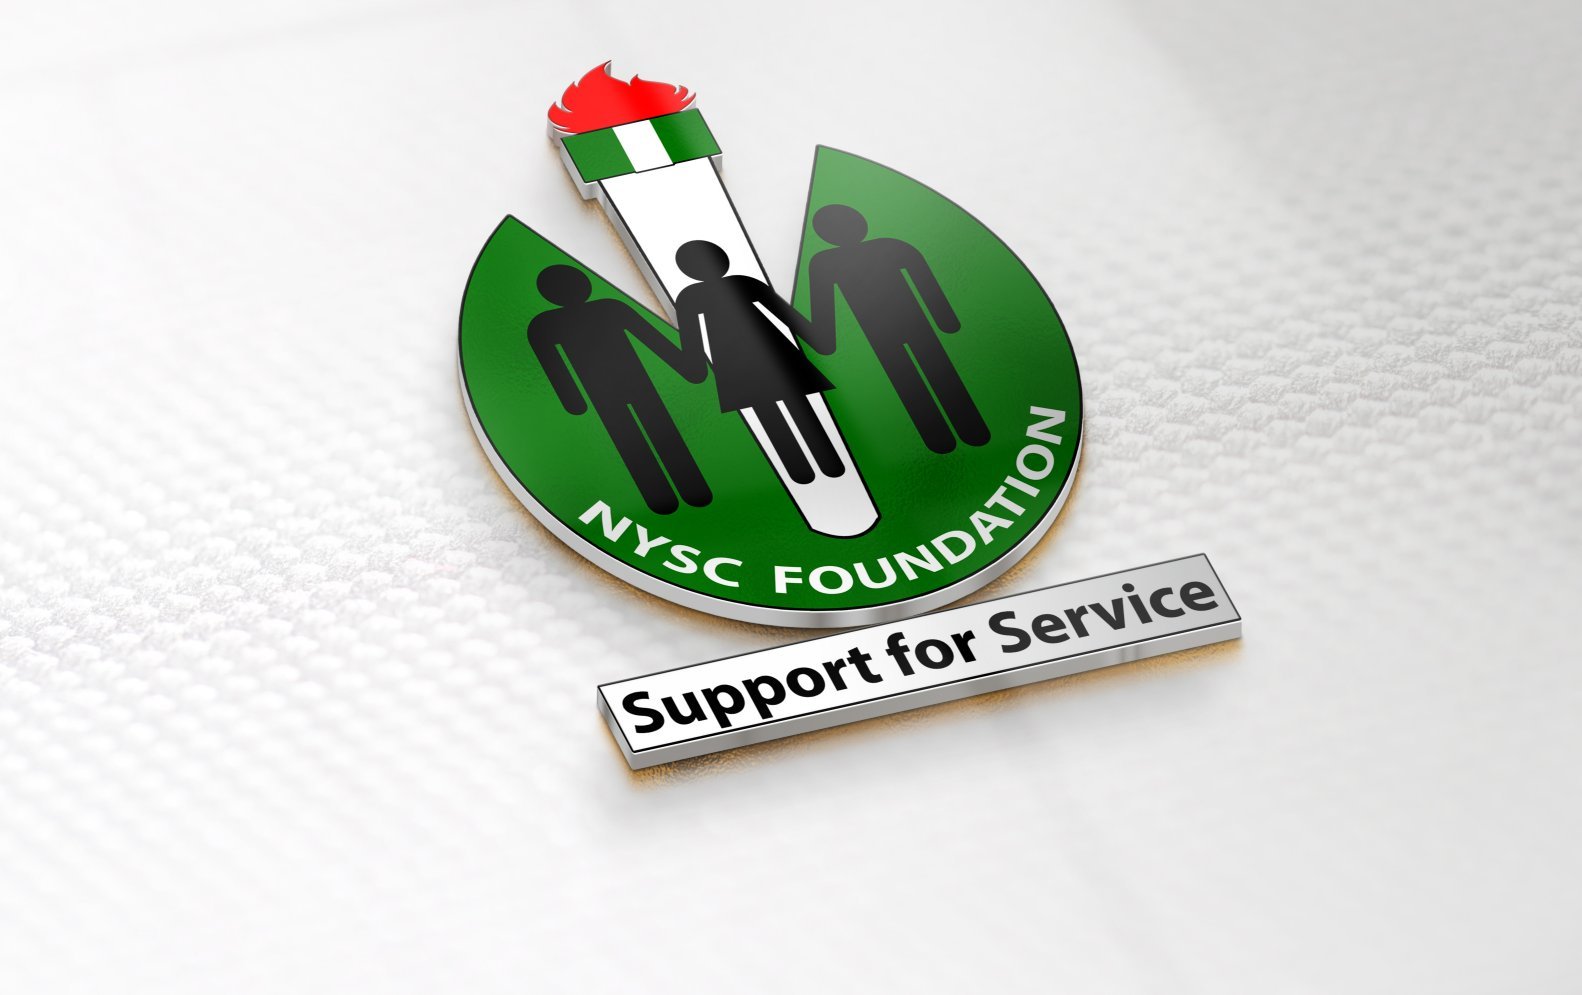 Welcome to NYSC Foundation – Support for Service